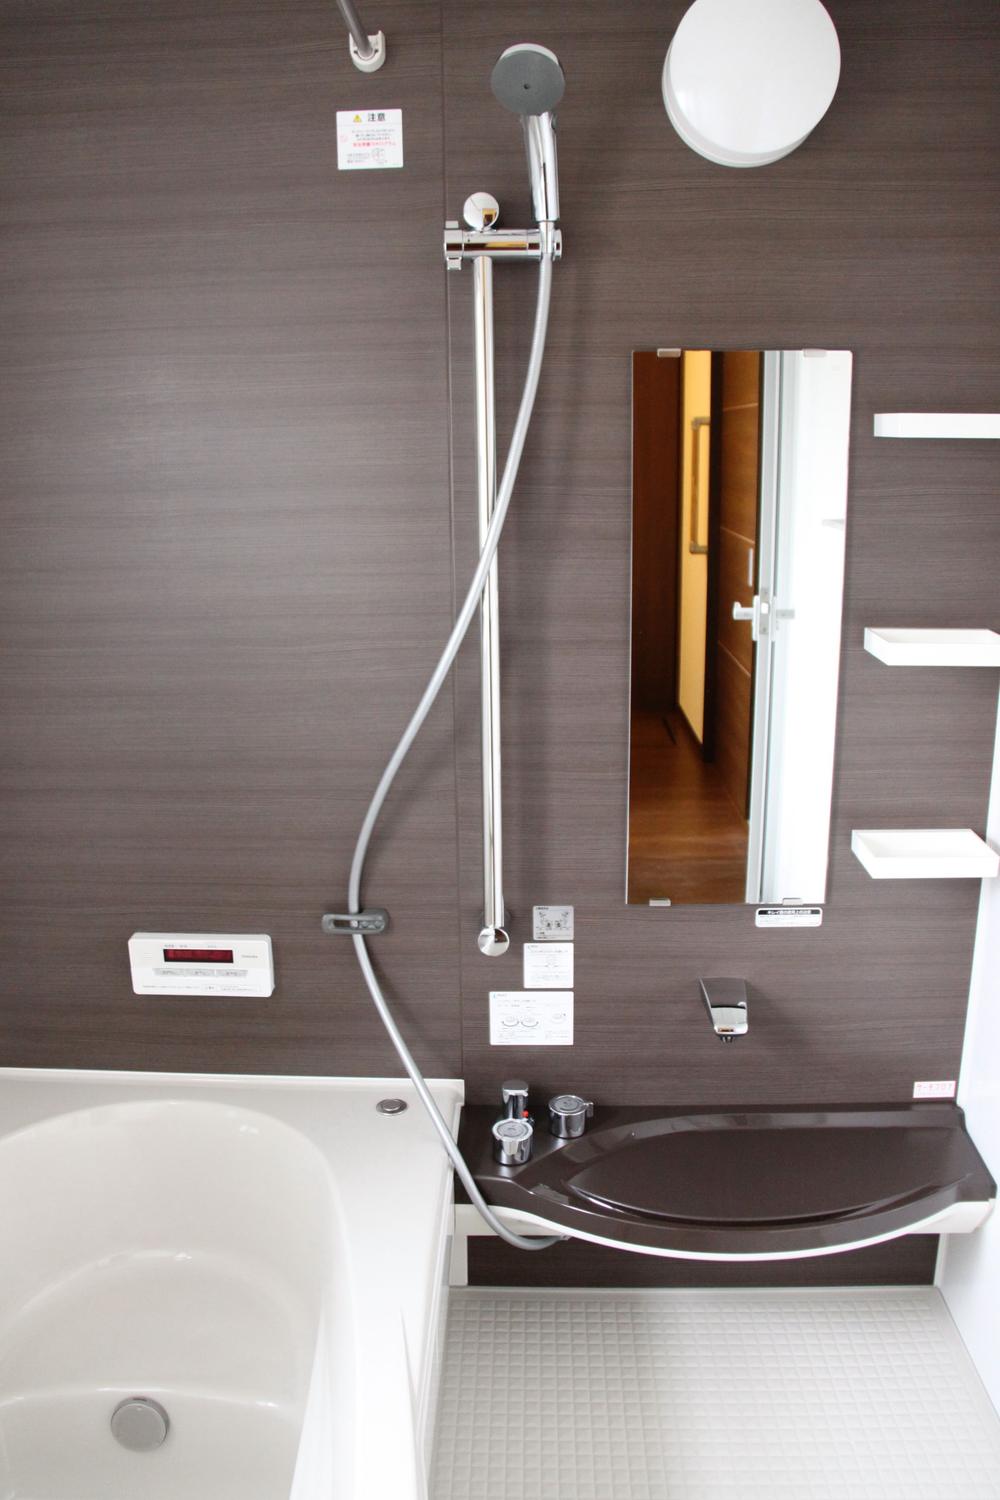 Same specifications photo (bathroom). Fashionable, It is a highly insulating effect bathroom! 